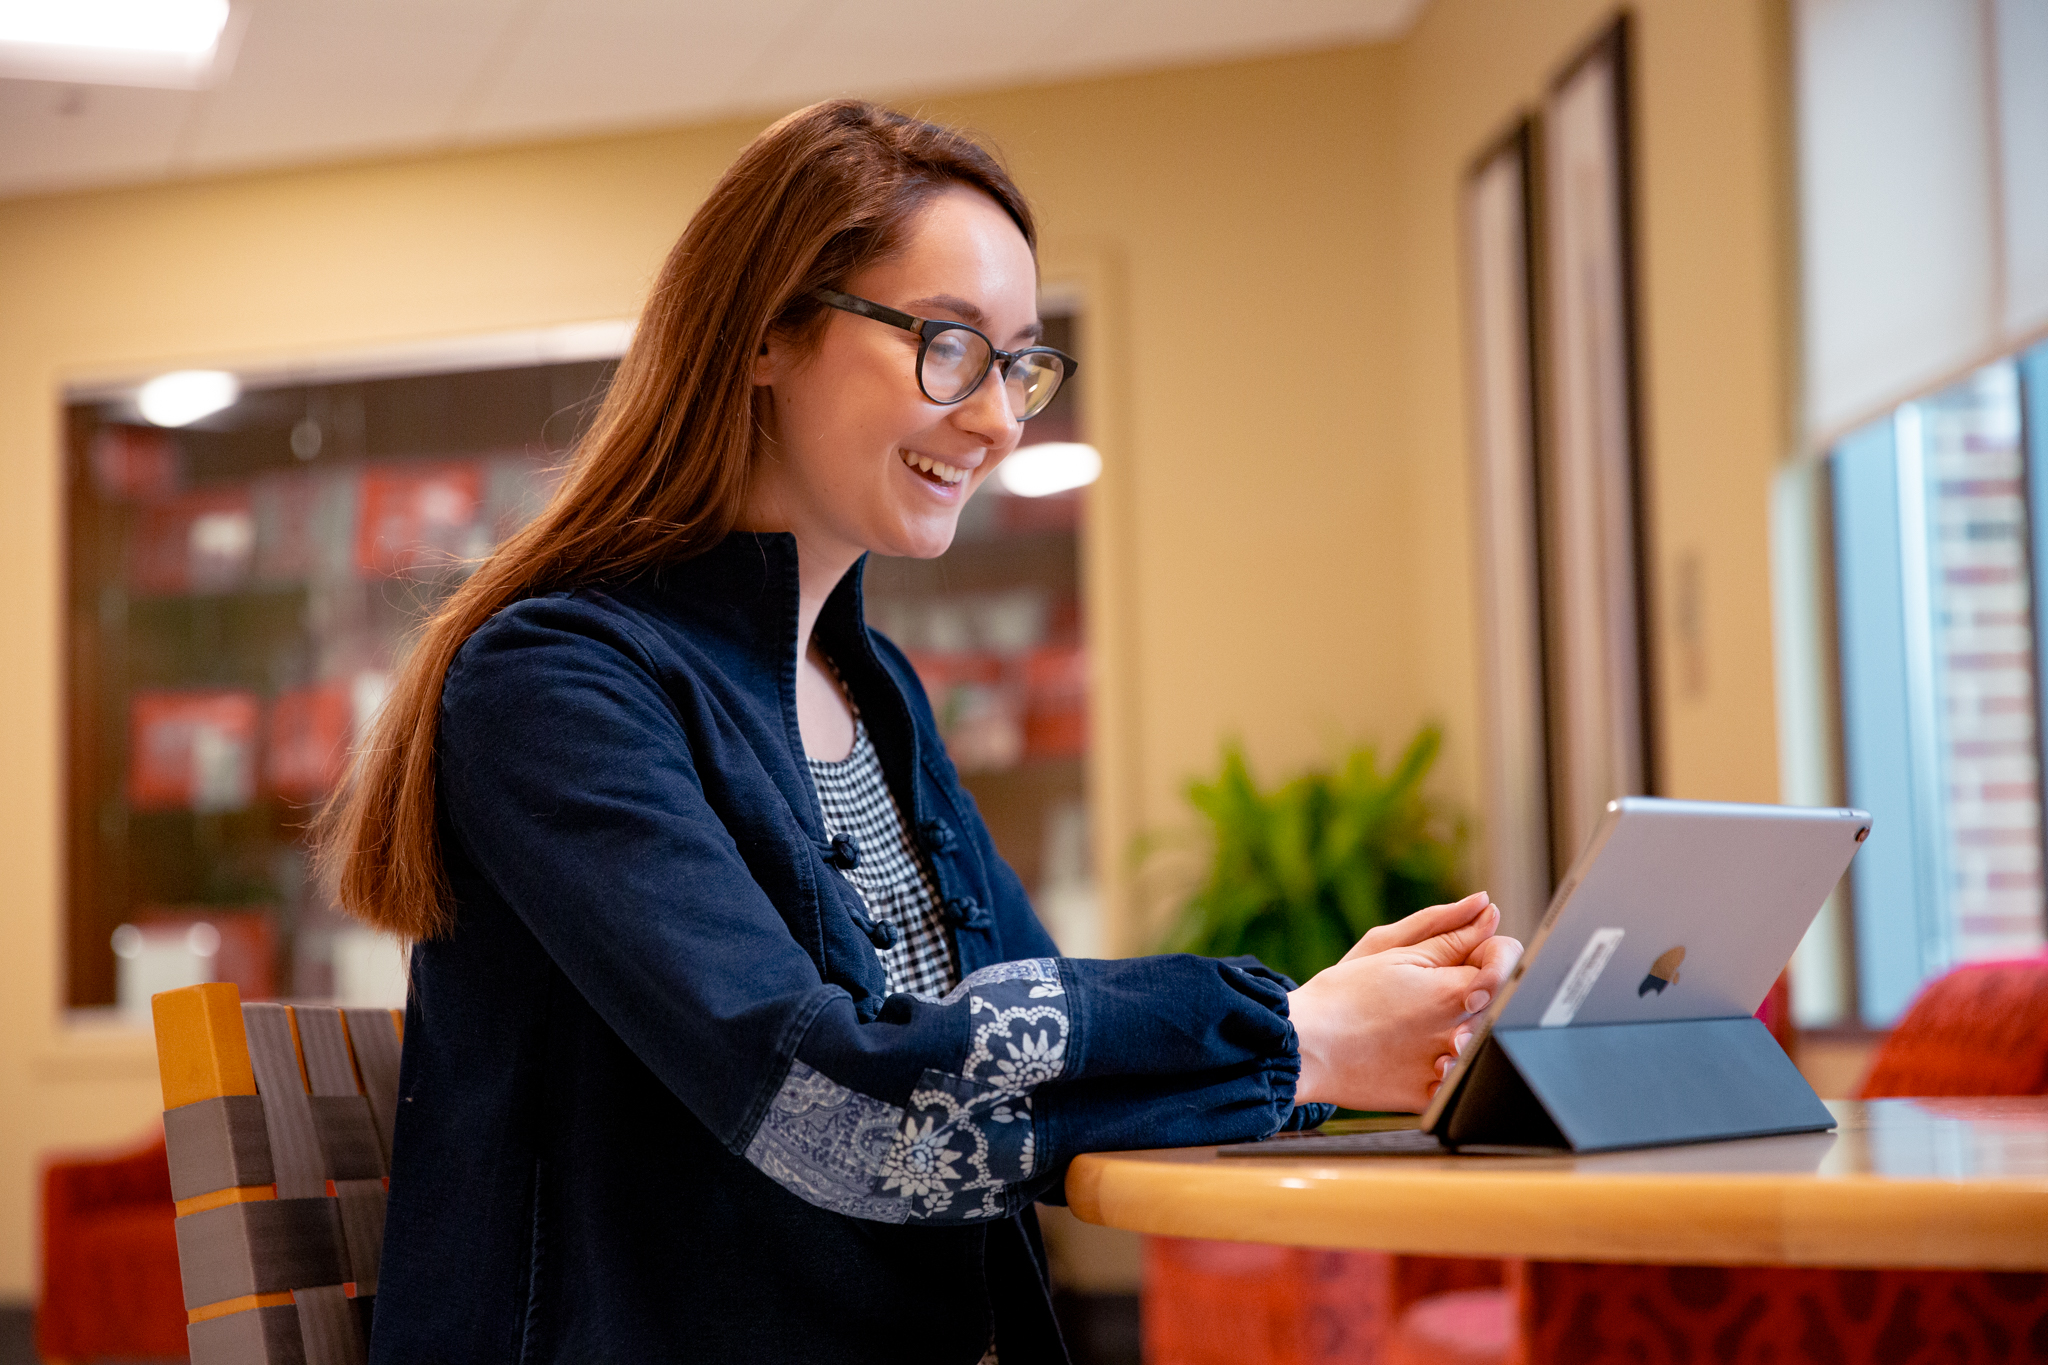 A young woman is smiling at her iPad screen, communicating with her instructor for the online master's course.